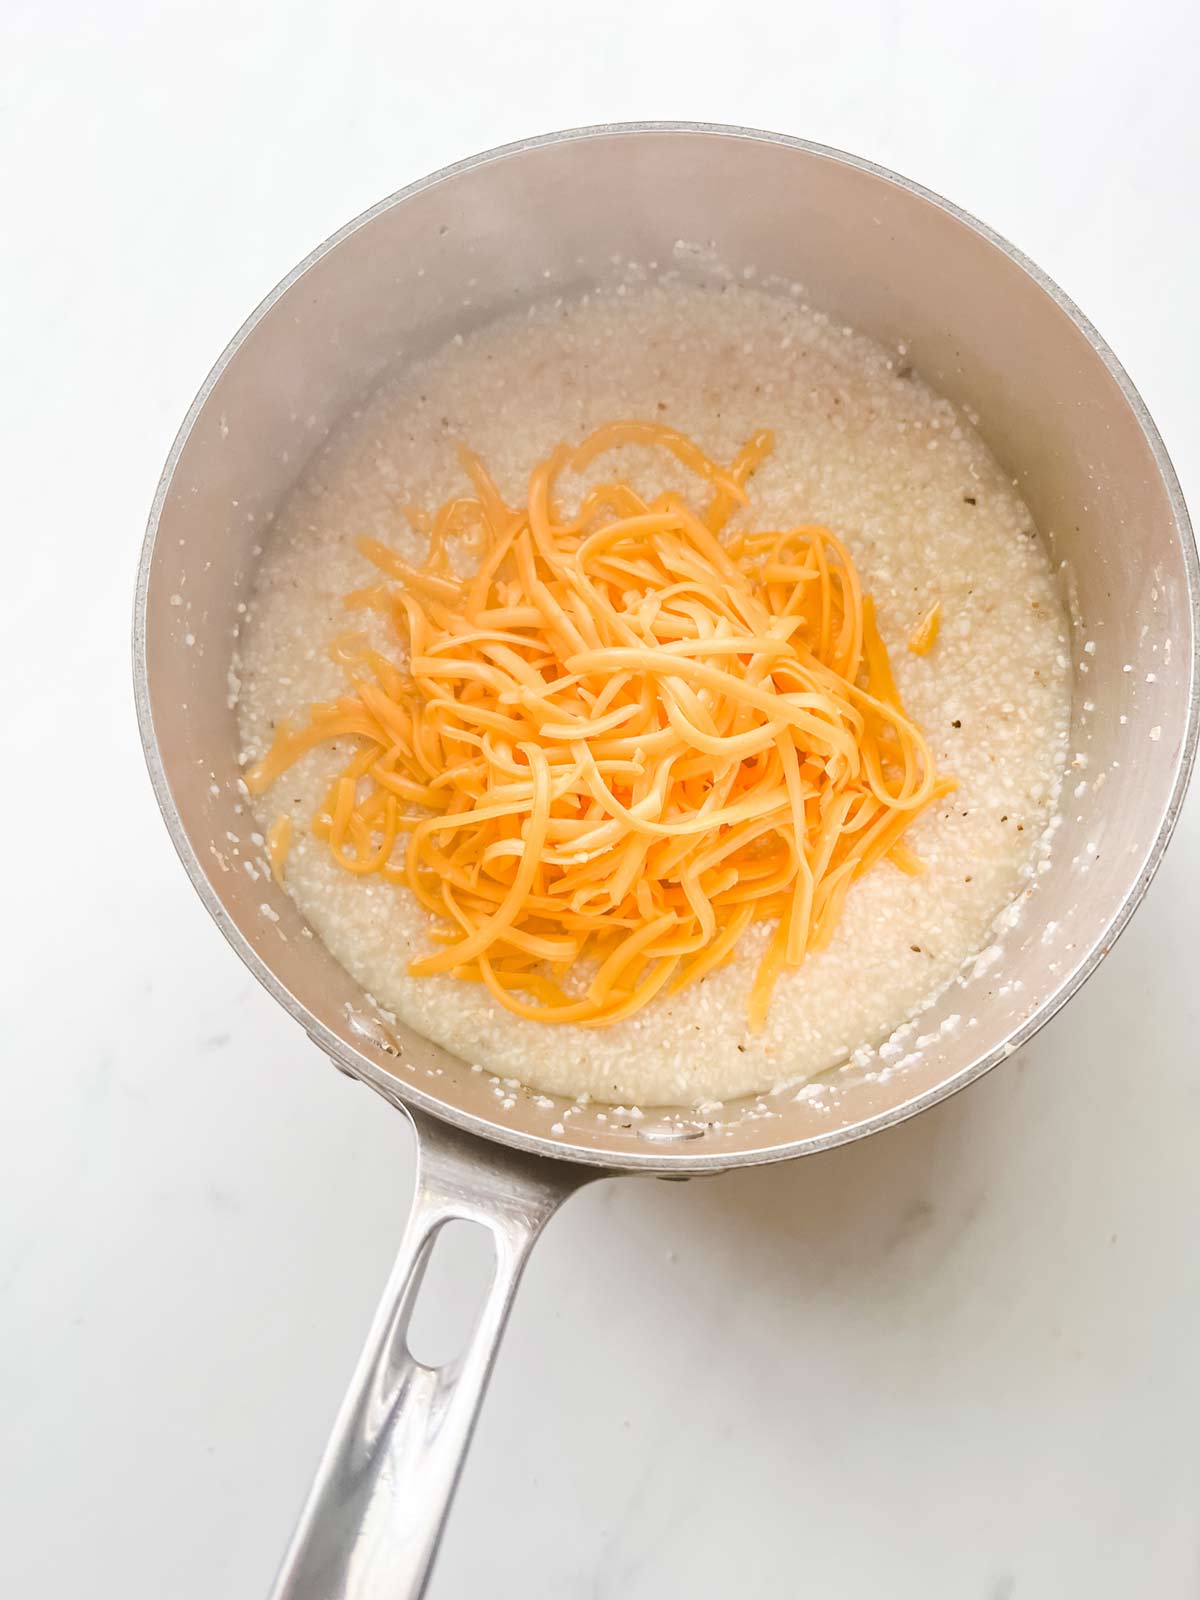 Shredded cheese on top of grits in a saucepan.